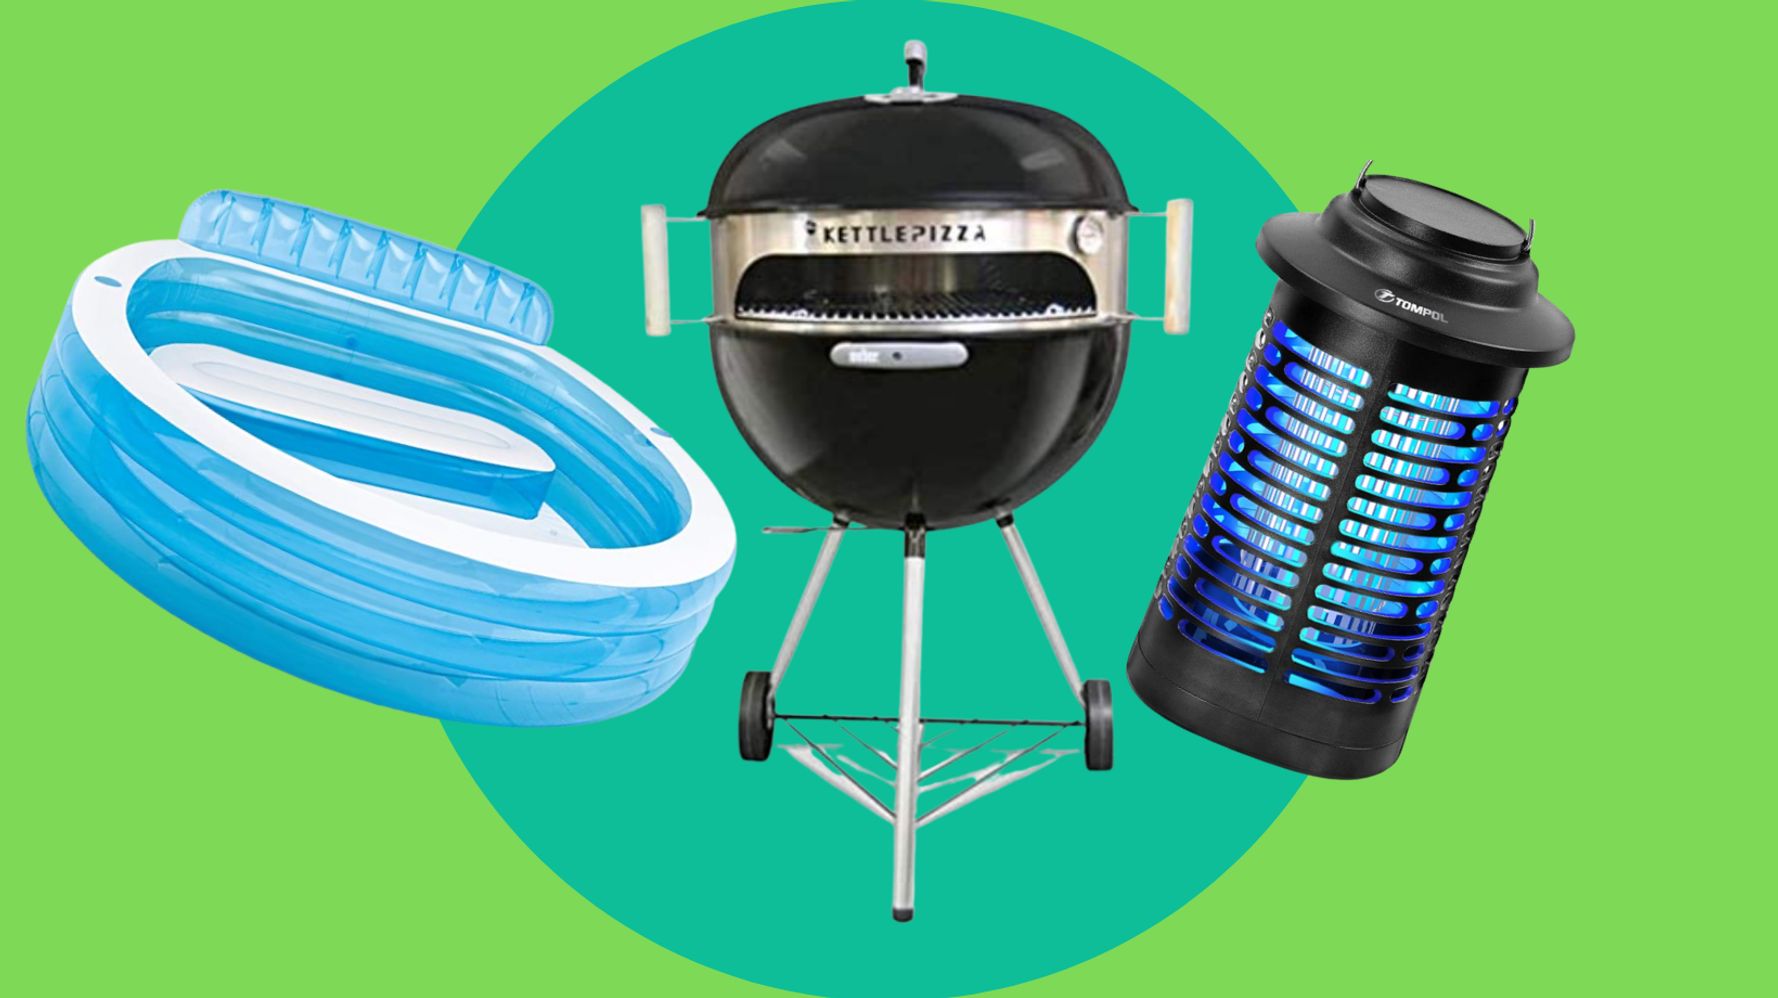 Upgrade Your Patio Instantly with These Seven Genius Products